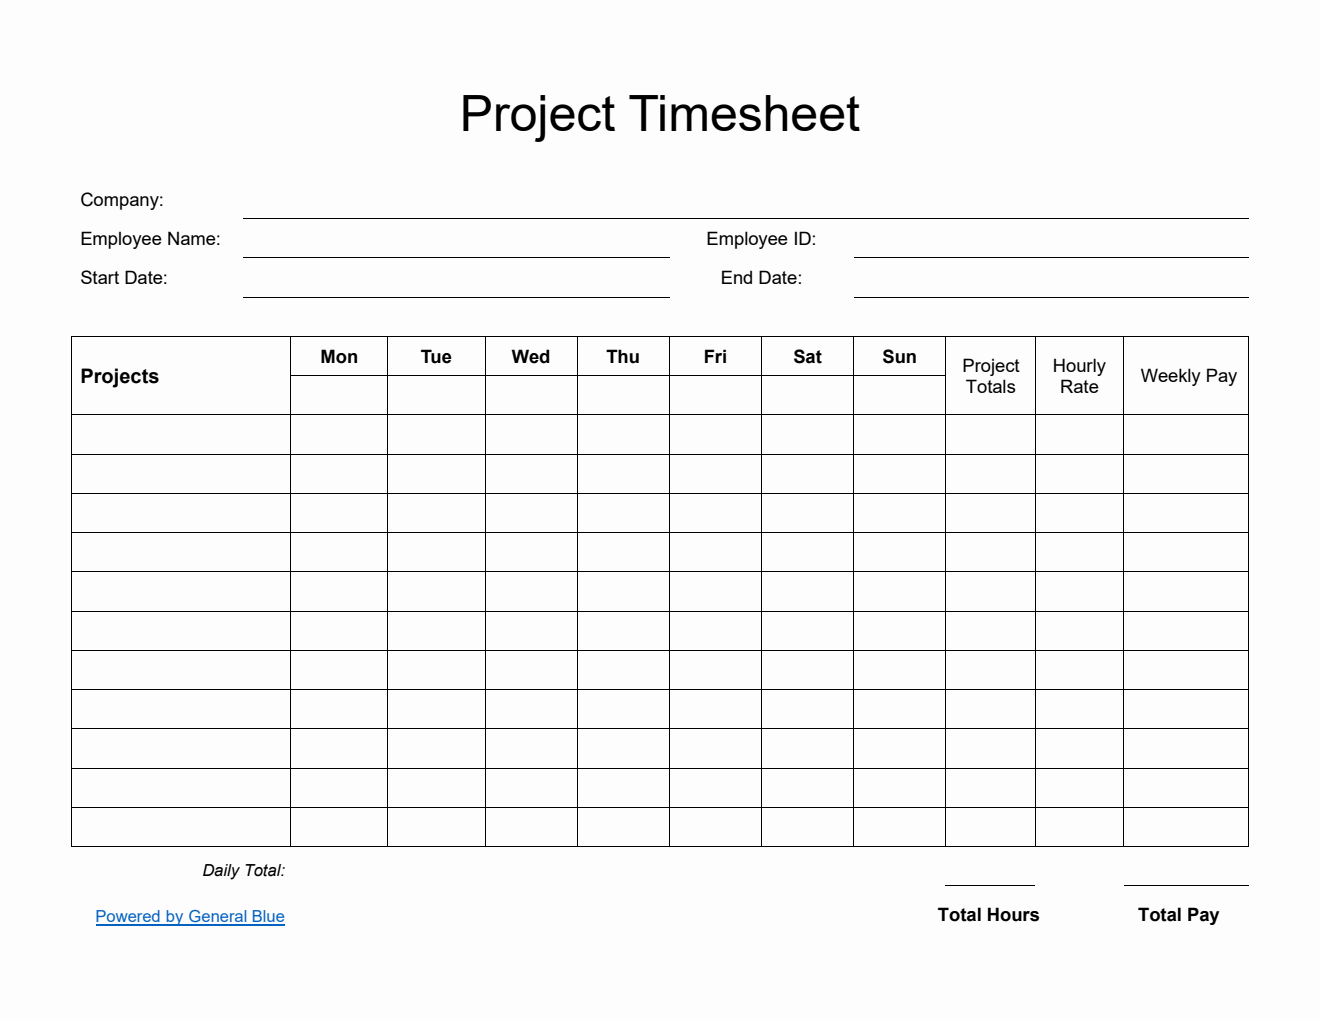 Printable Project Timesheet in PDF